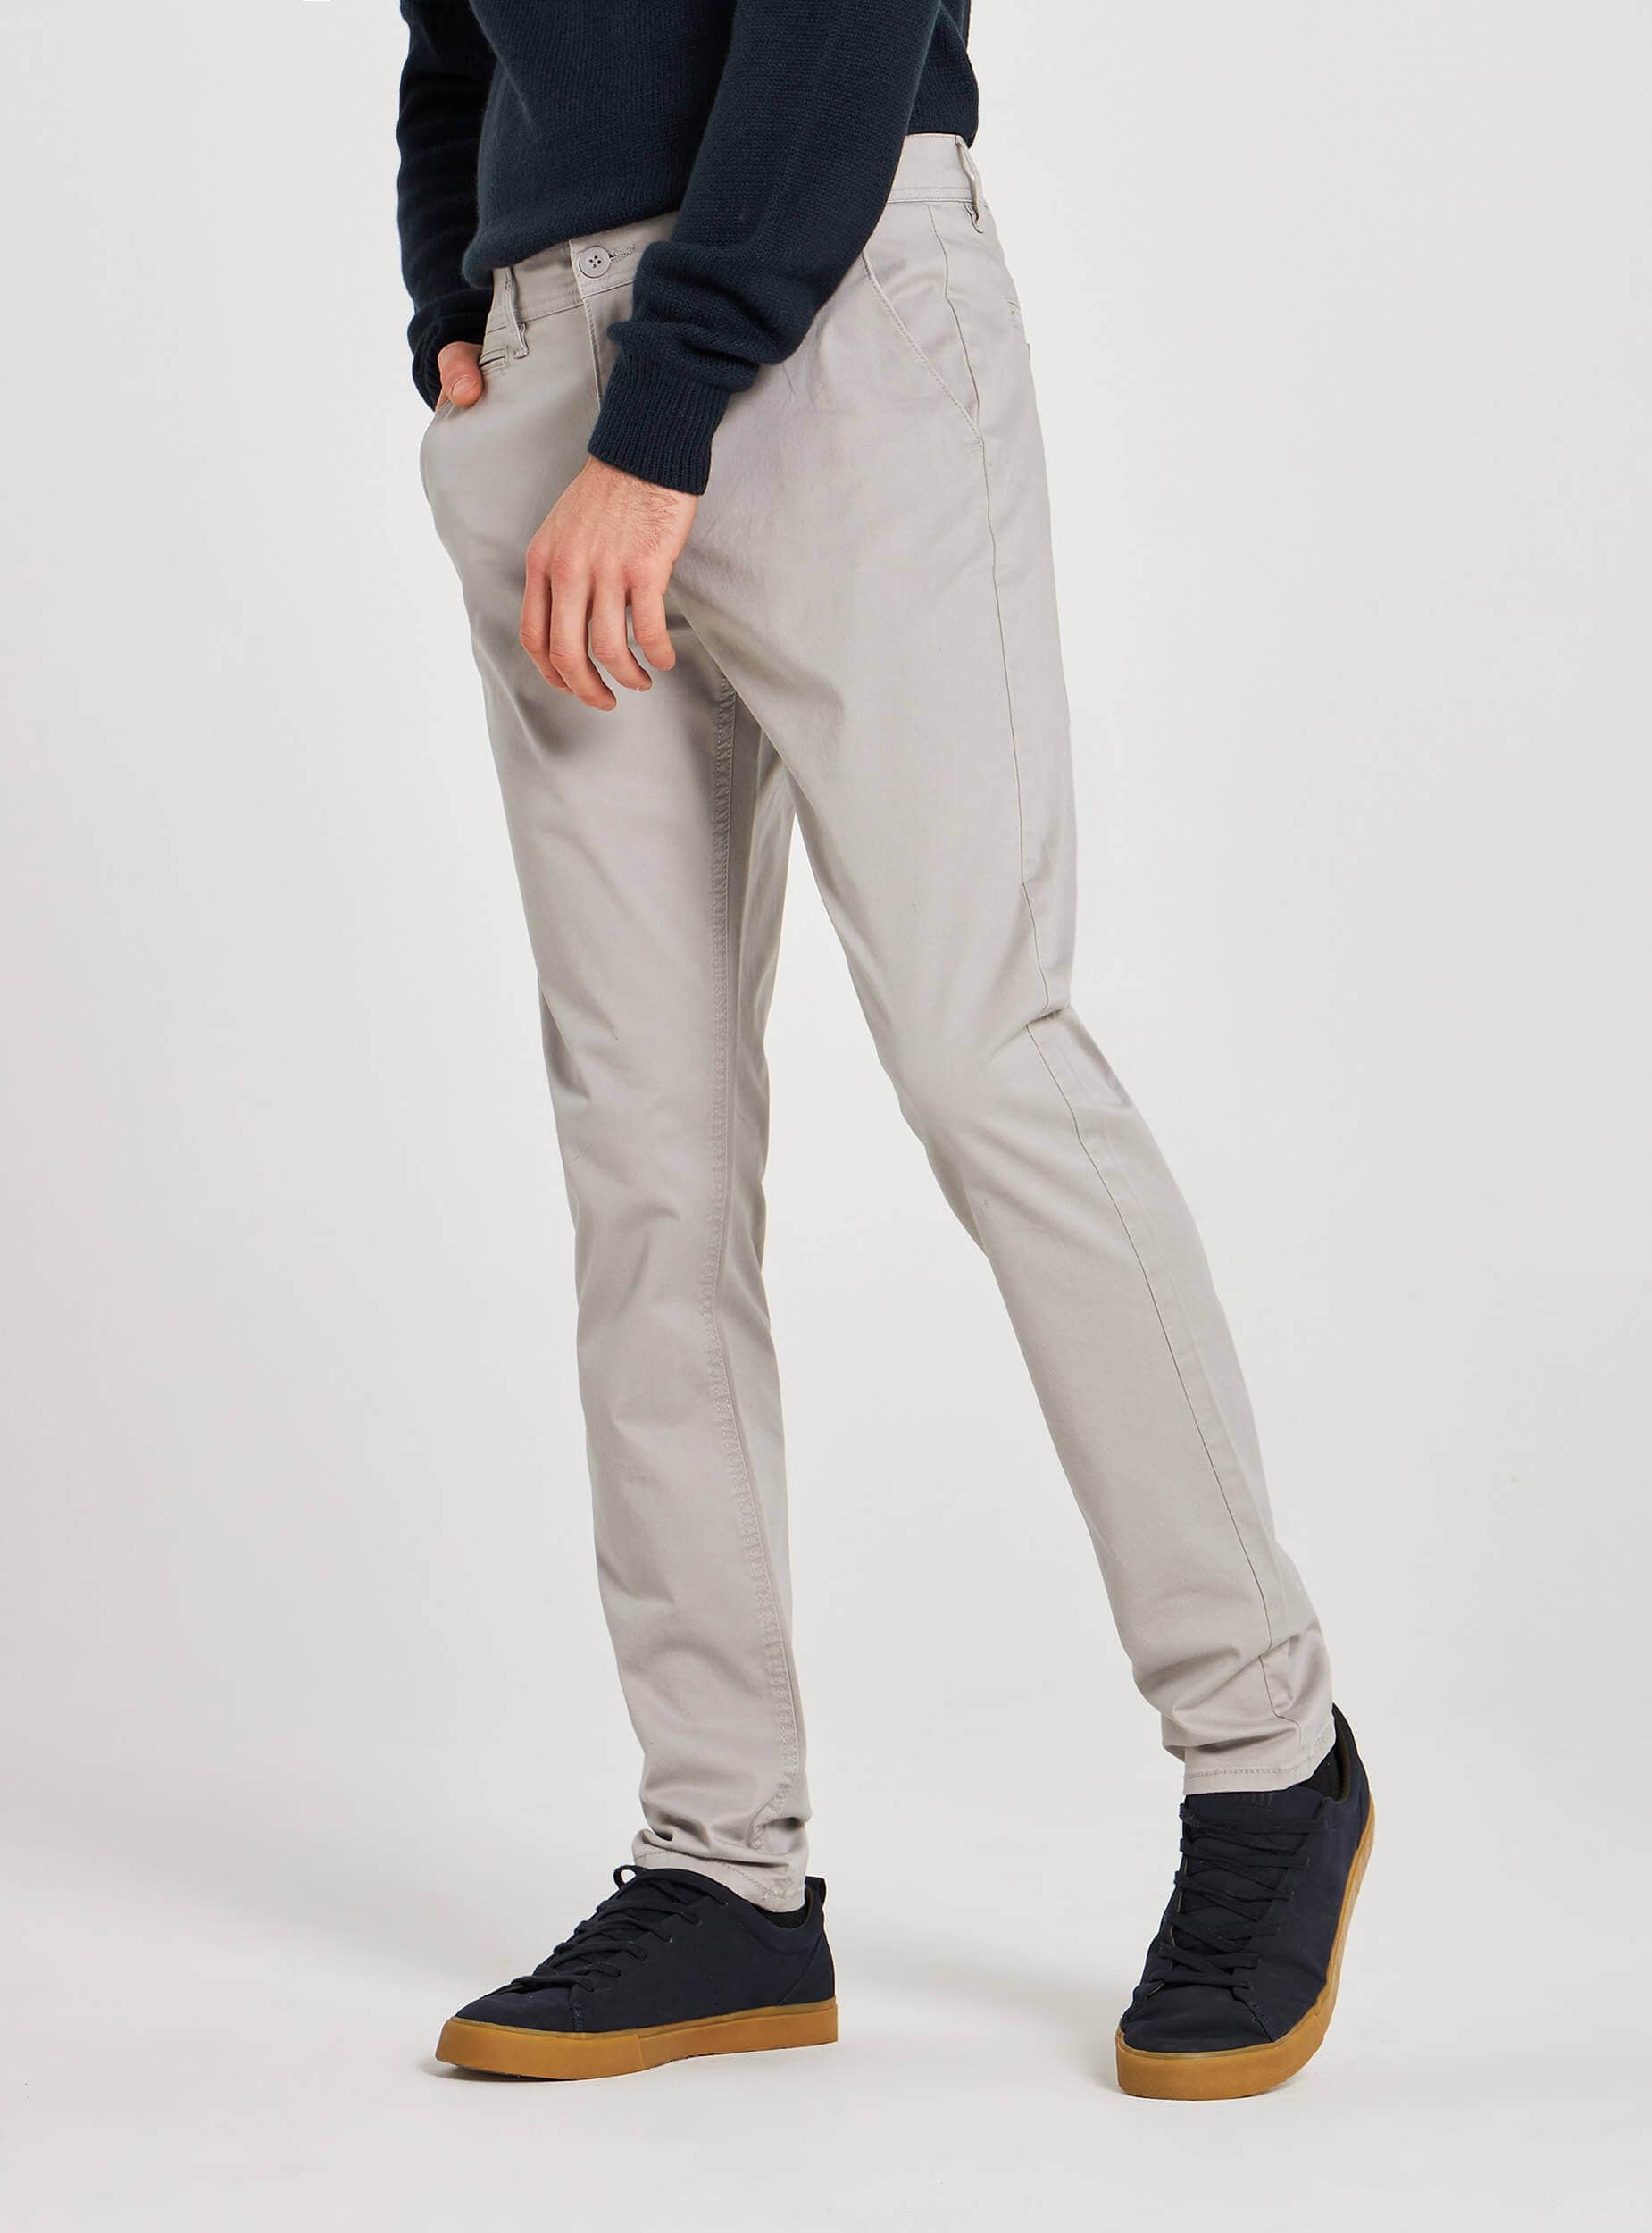 To chinos shoes grey wear with What Color